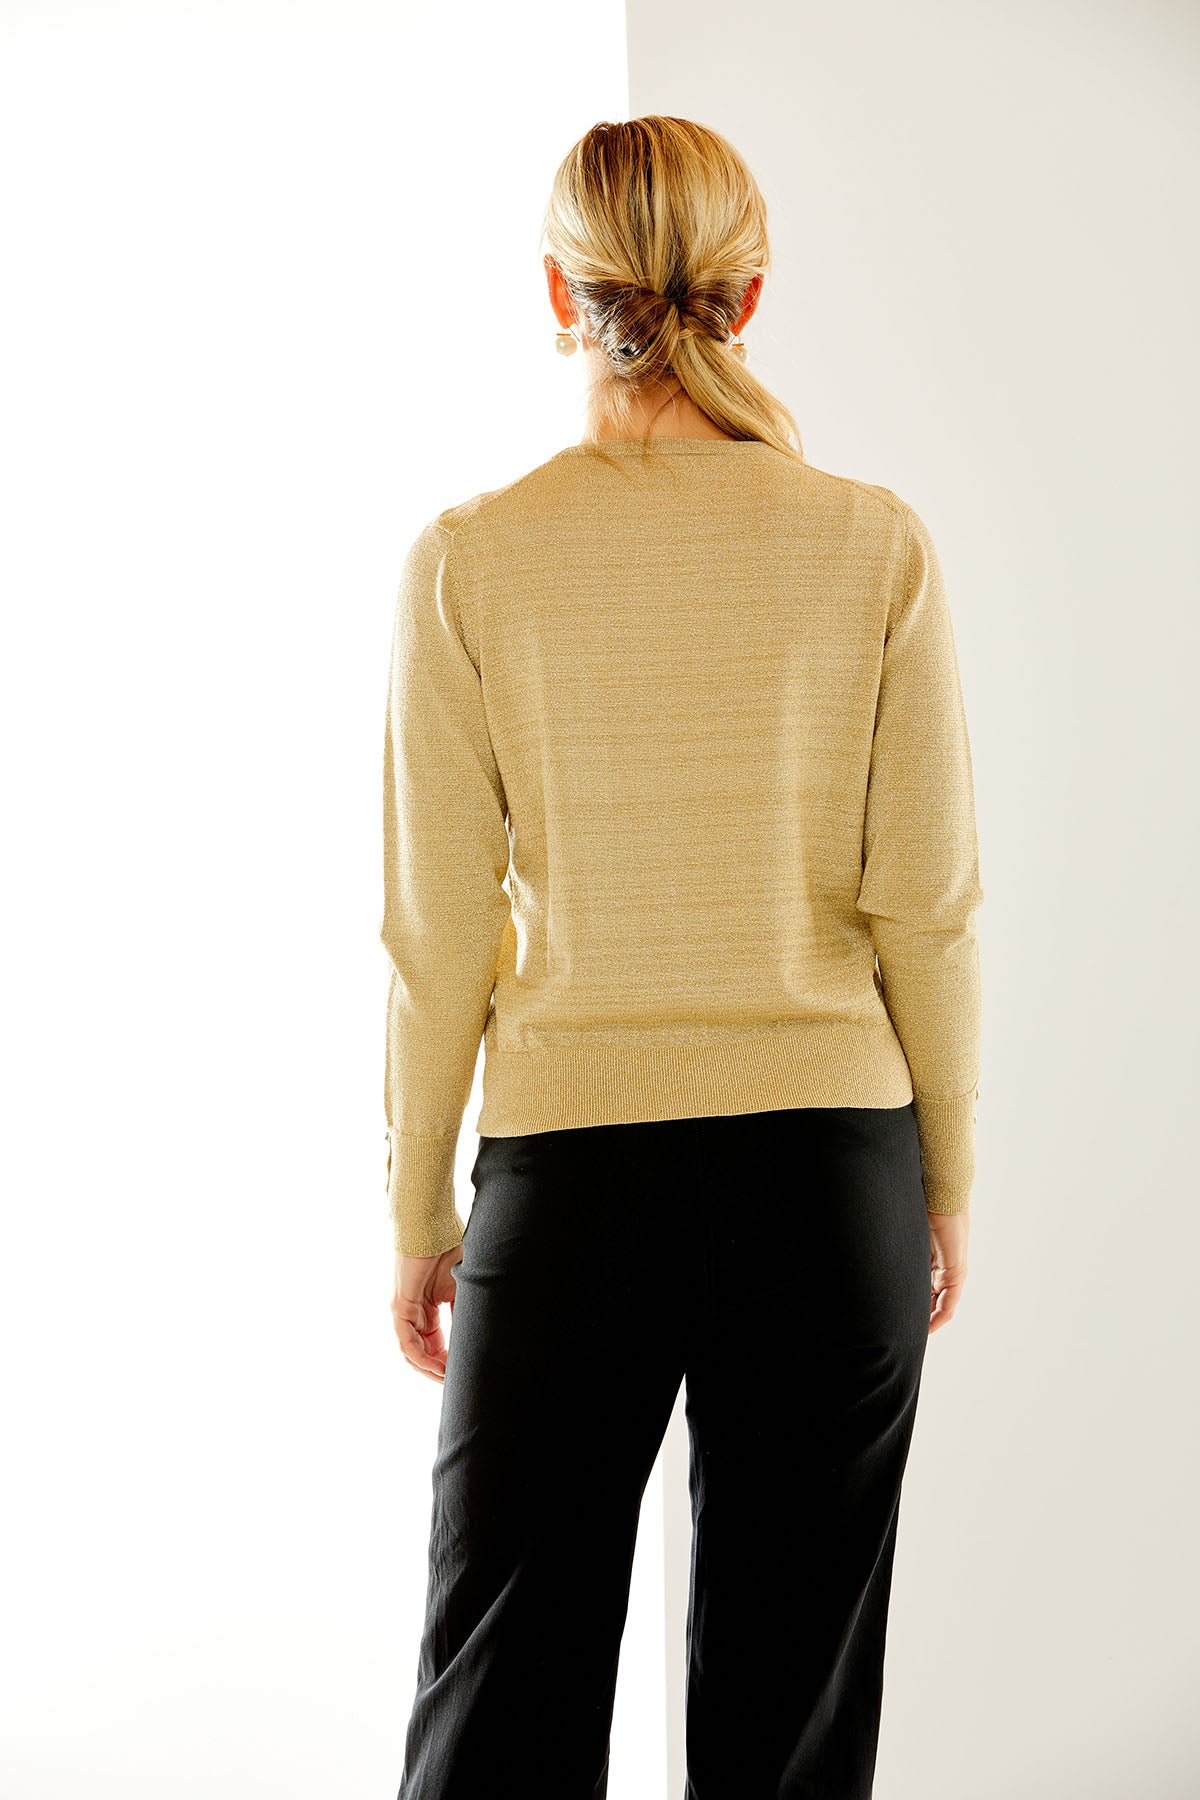 Woman in gold shimmer crewneck pullover